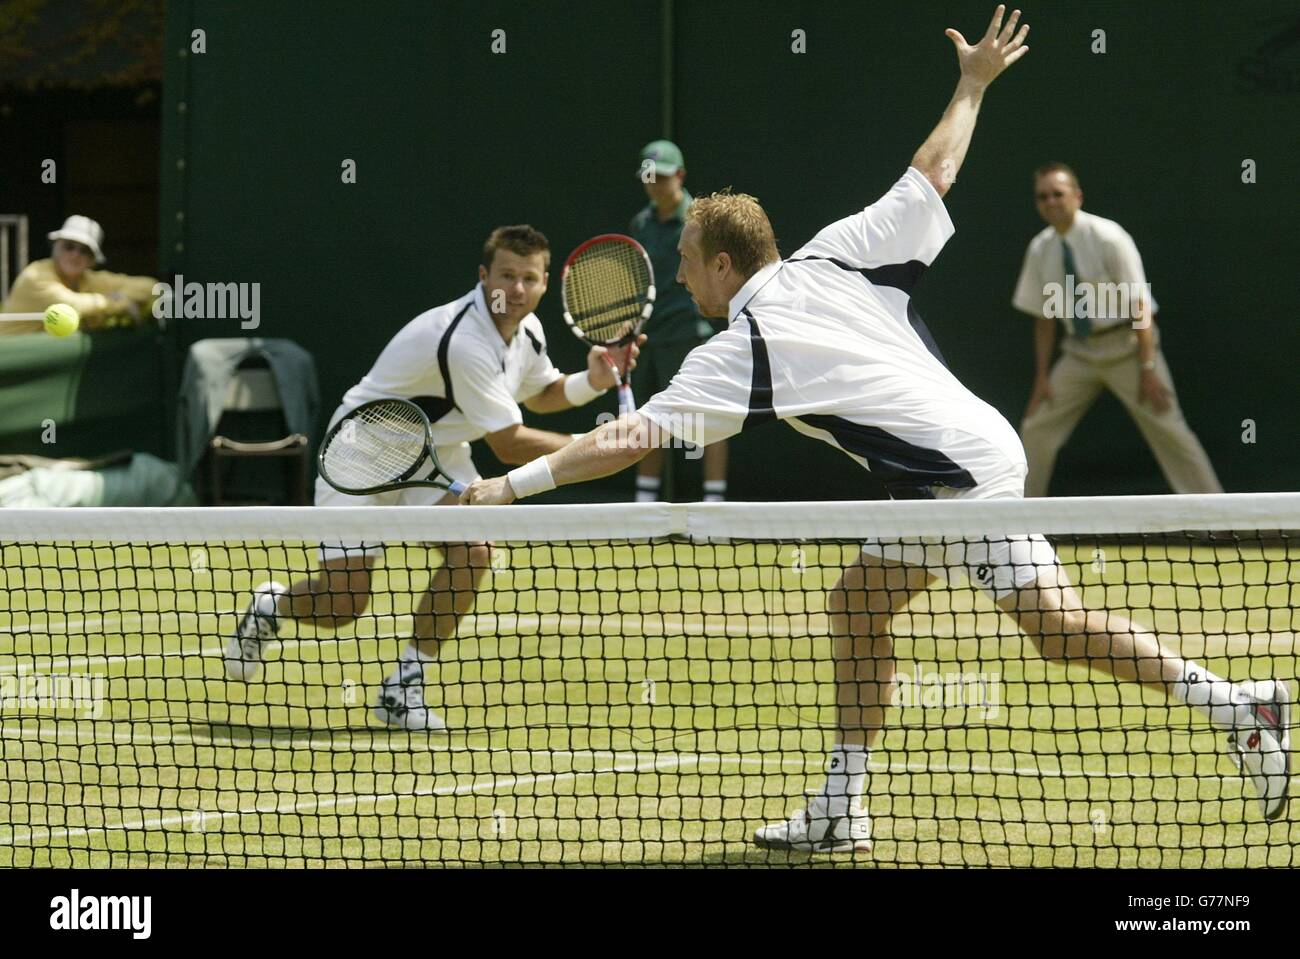 British doubles pairing Miles MacLagan and Martin Lee in action against Scott Humphries and Mark Merlkein at the All England Lawn Tennis Championships. MacLagan and Lee went through 7:6/7:6/6:4. , NO MOBILE PHONE USE. Stock Photo